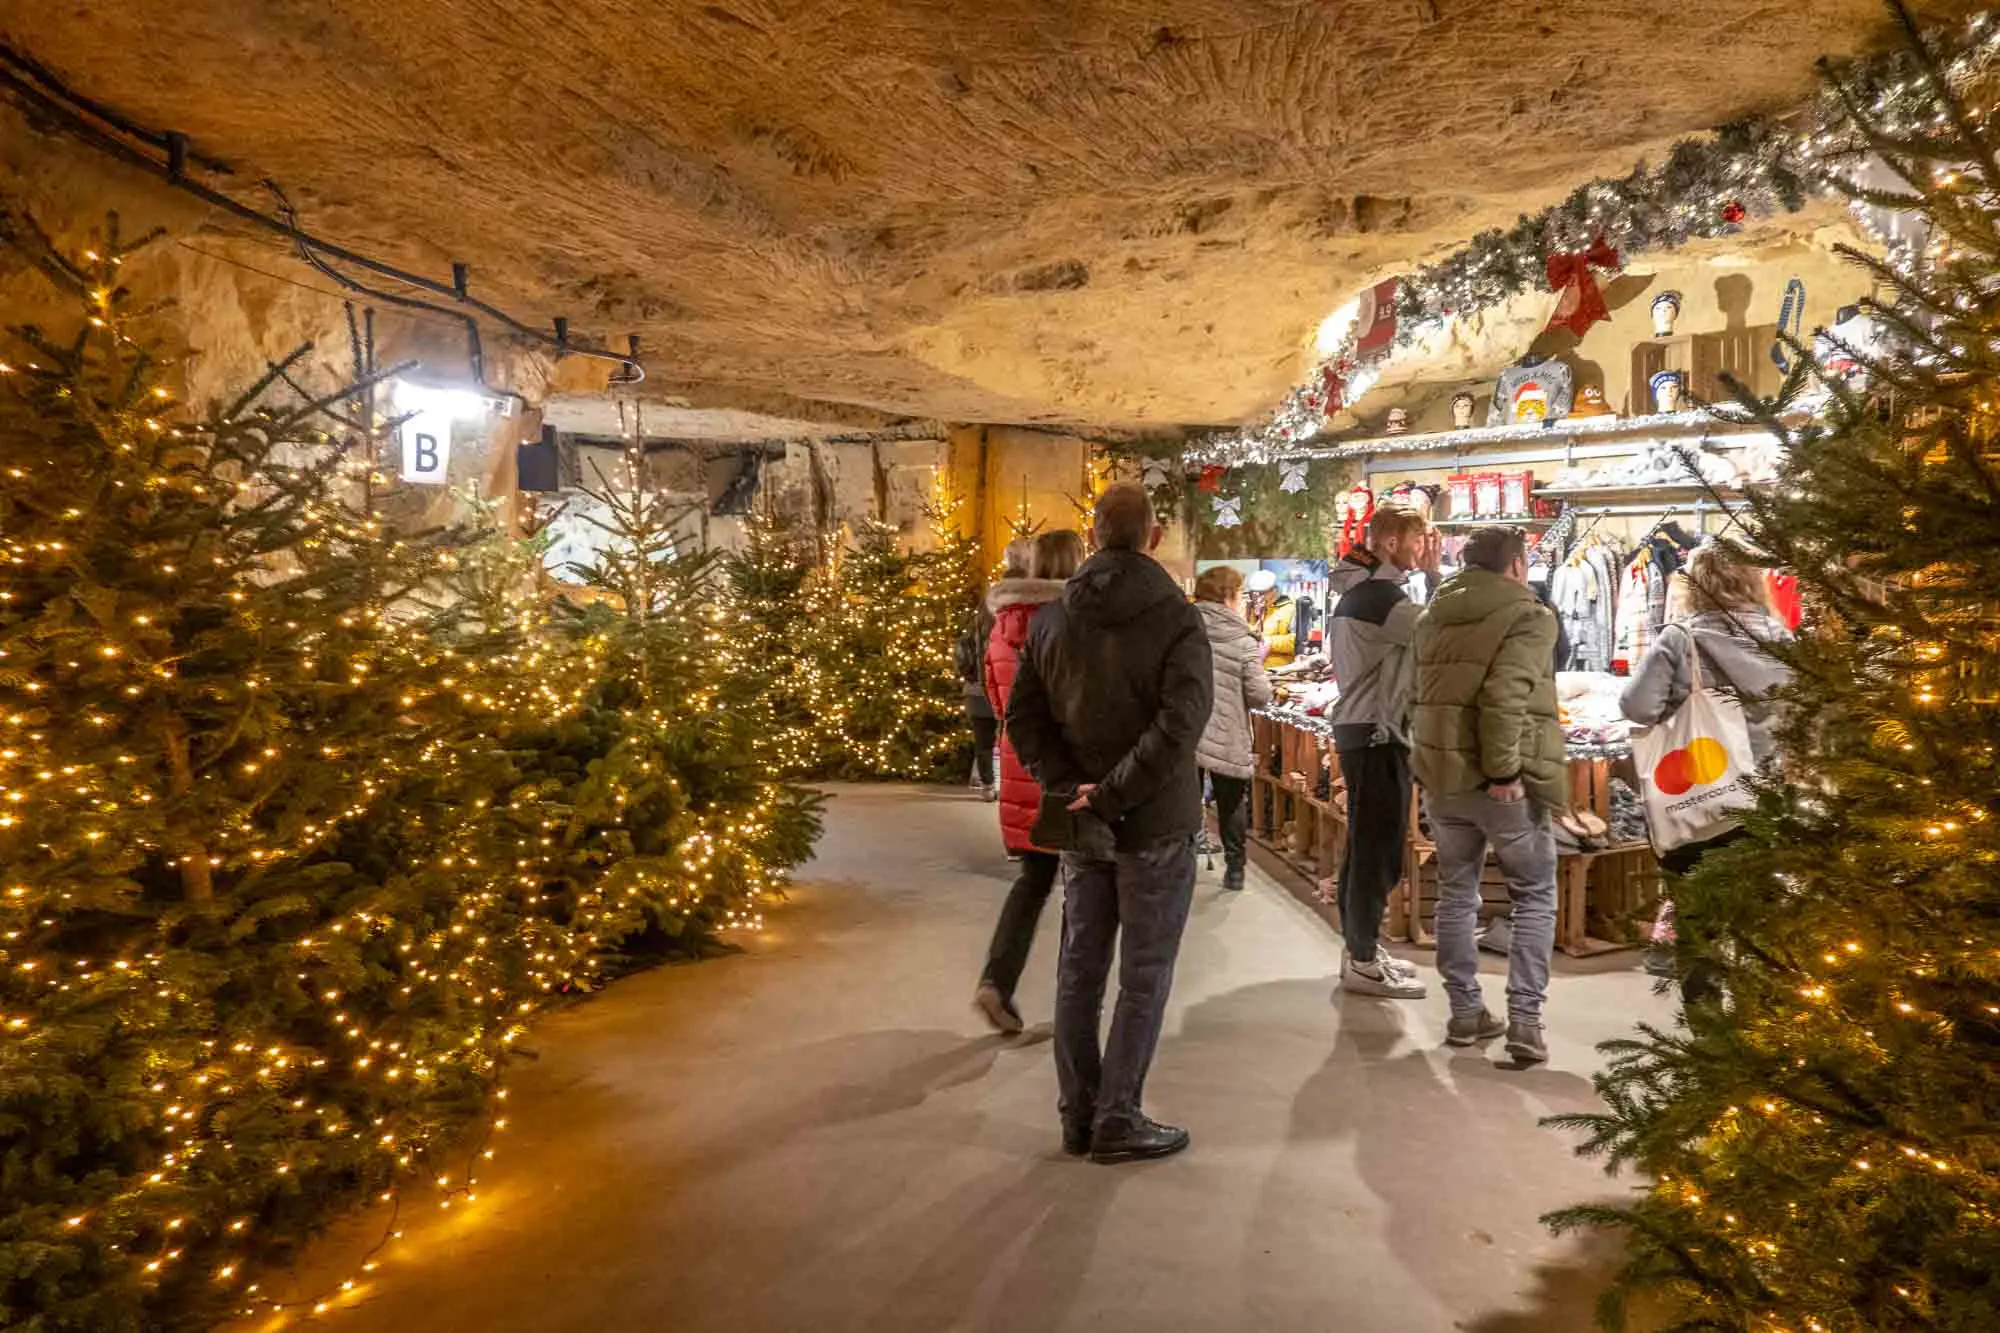 Shoppers at the Valkenburg Christmas market in a tunnel lined with Christmas trees.